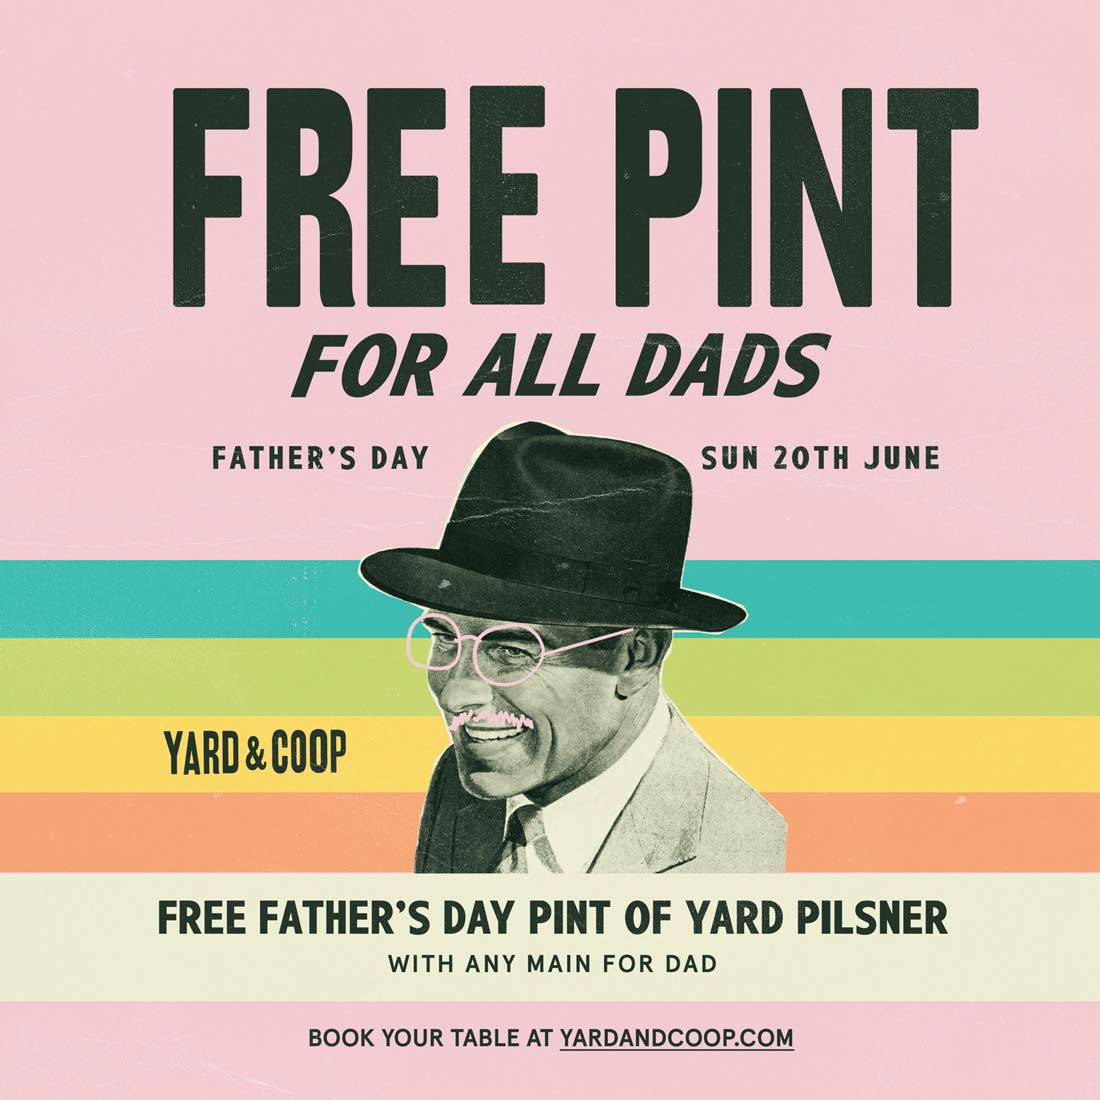 Free Pint for Fathers Day